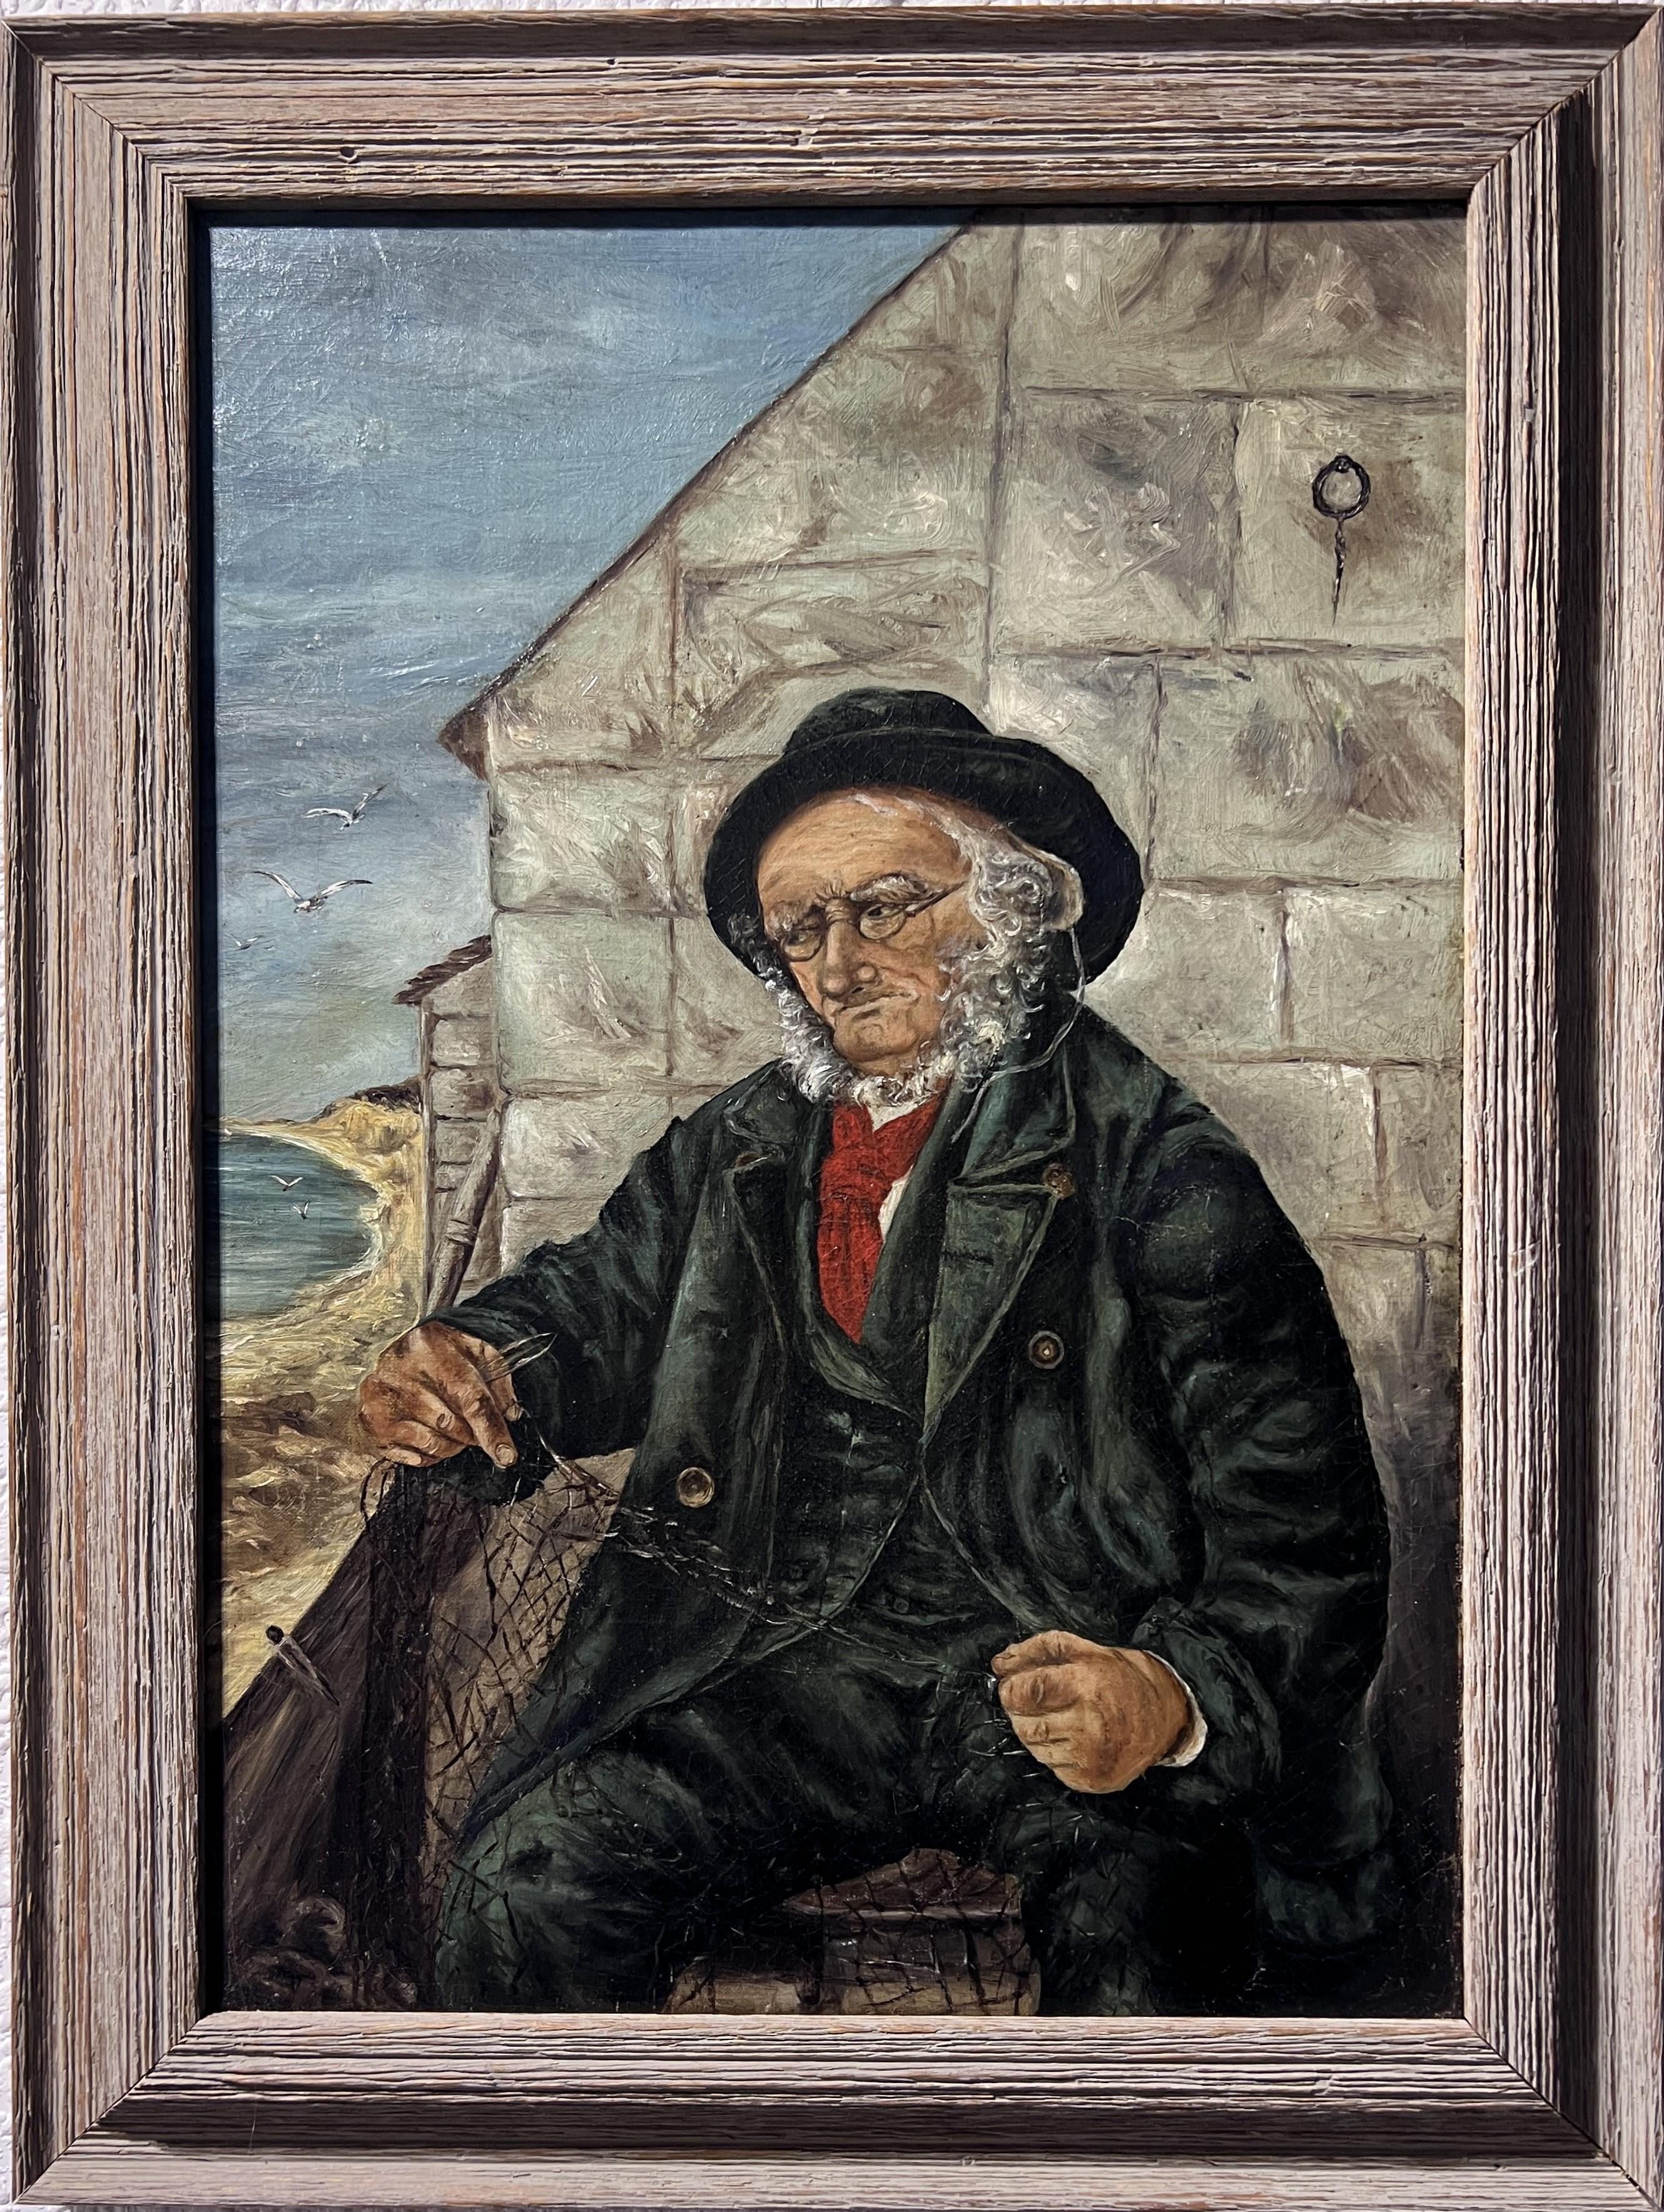 Unknown Portrait Painting - Vintage Oil on canvas painting, Portrait of a Fisherman, Framed, Unsigned